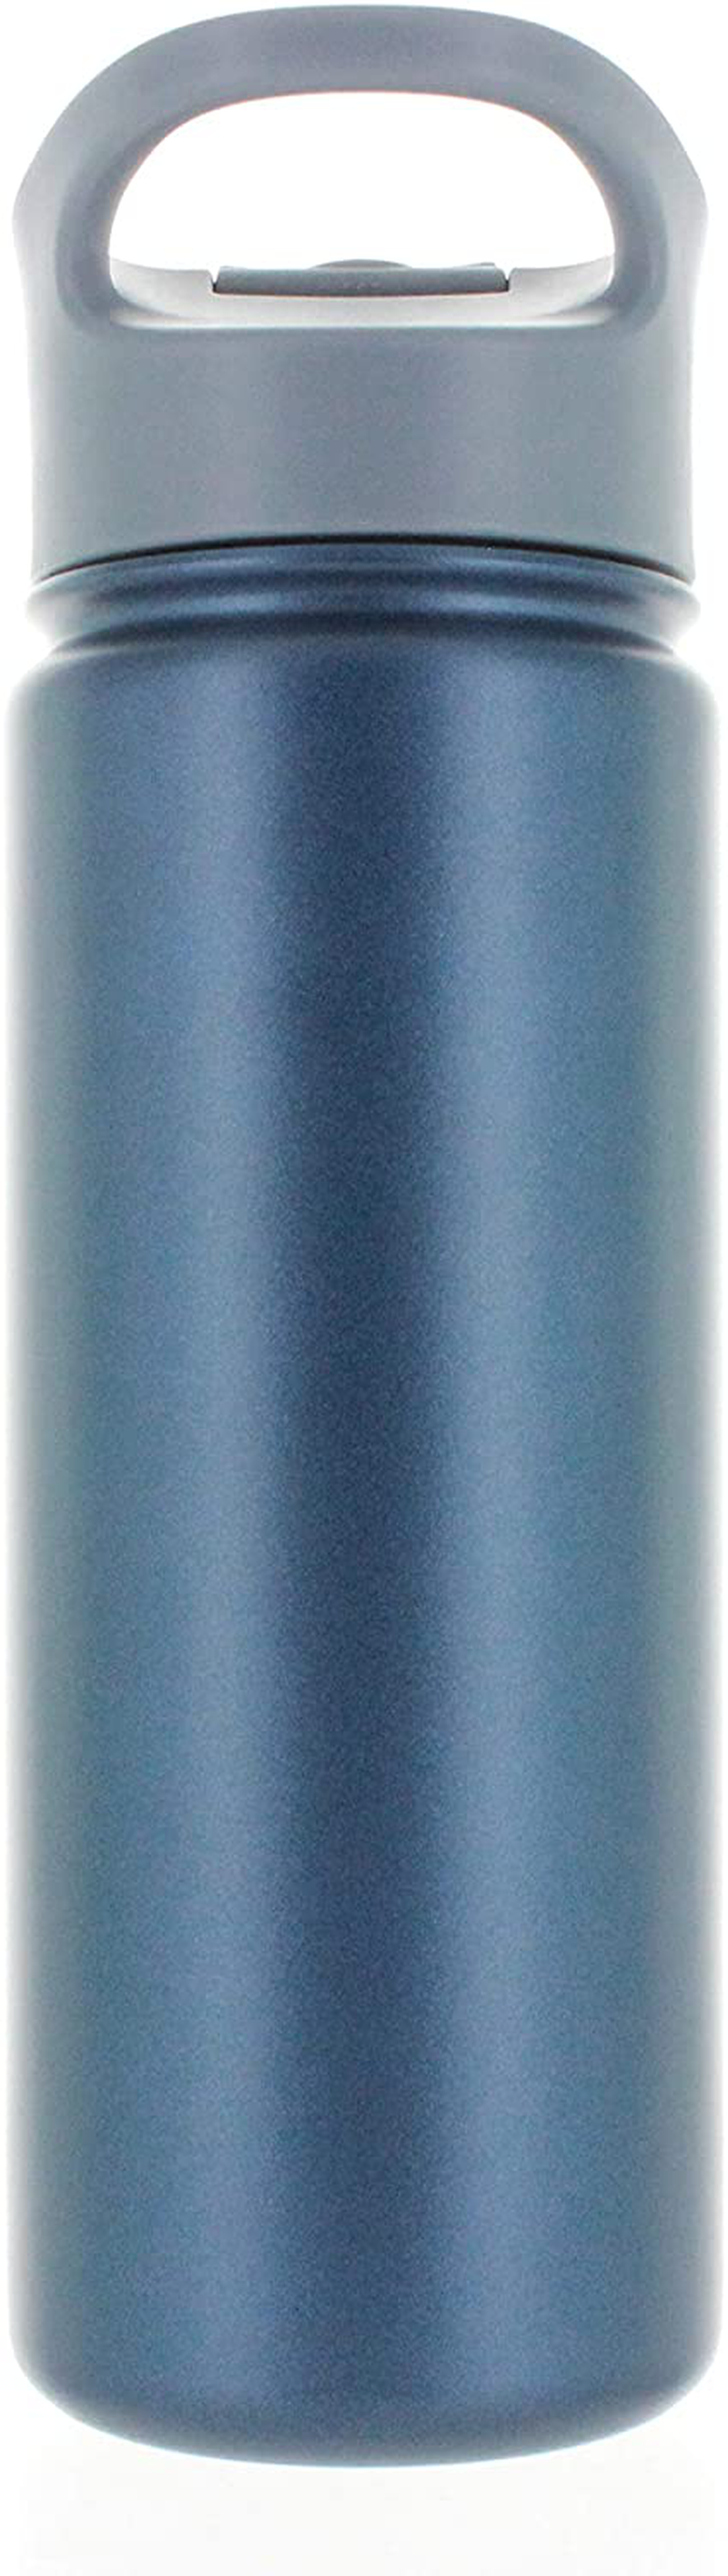 Stainless Steel Double Wall Insulated Water Bottle